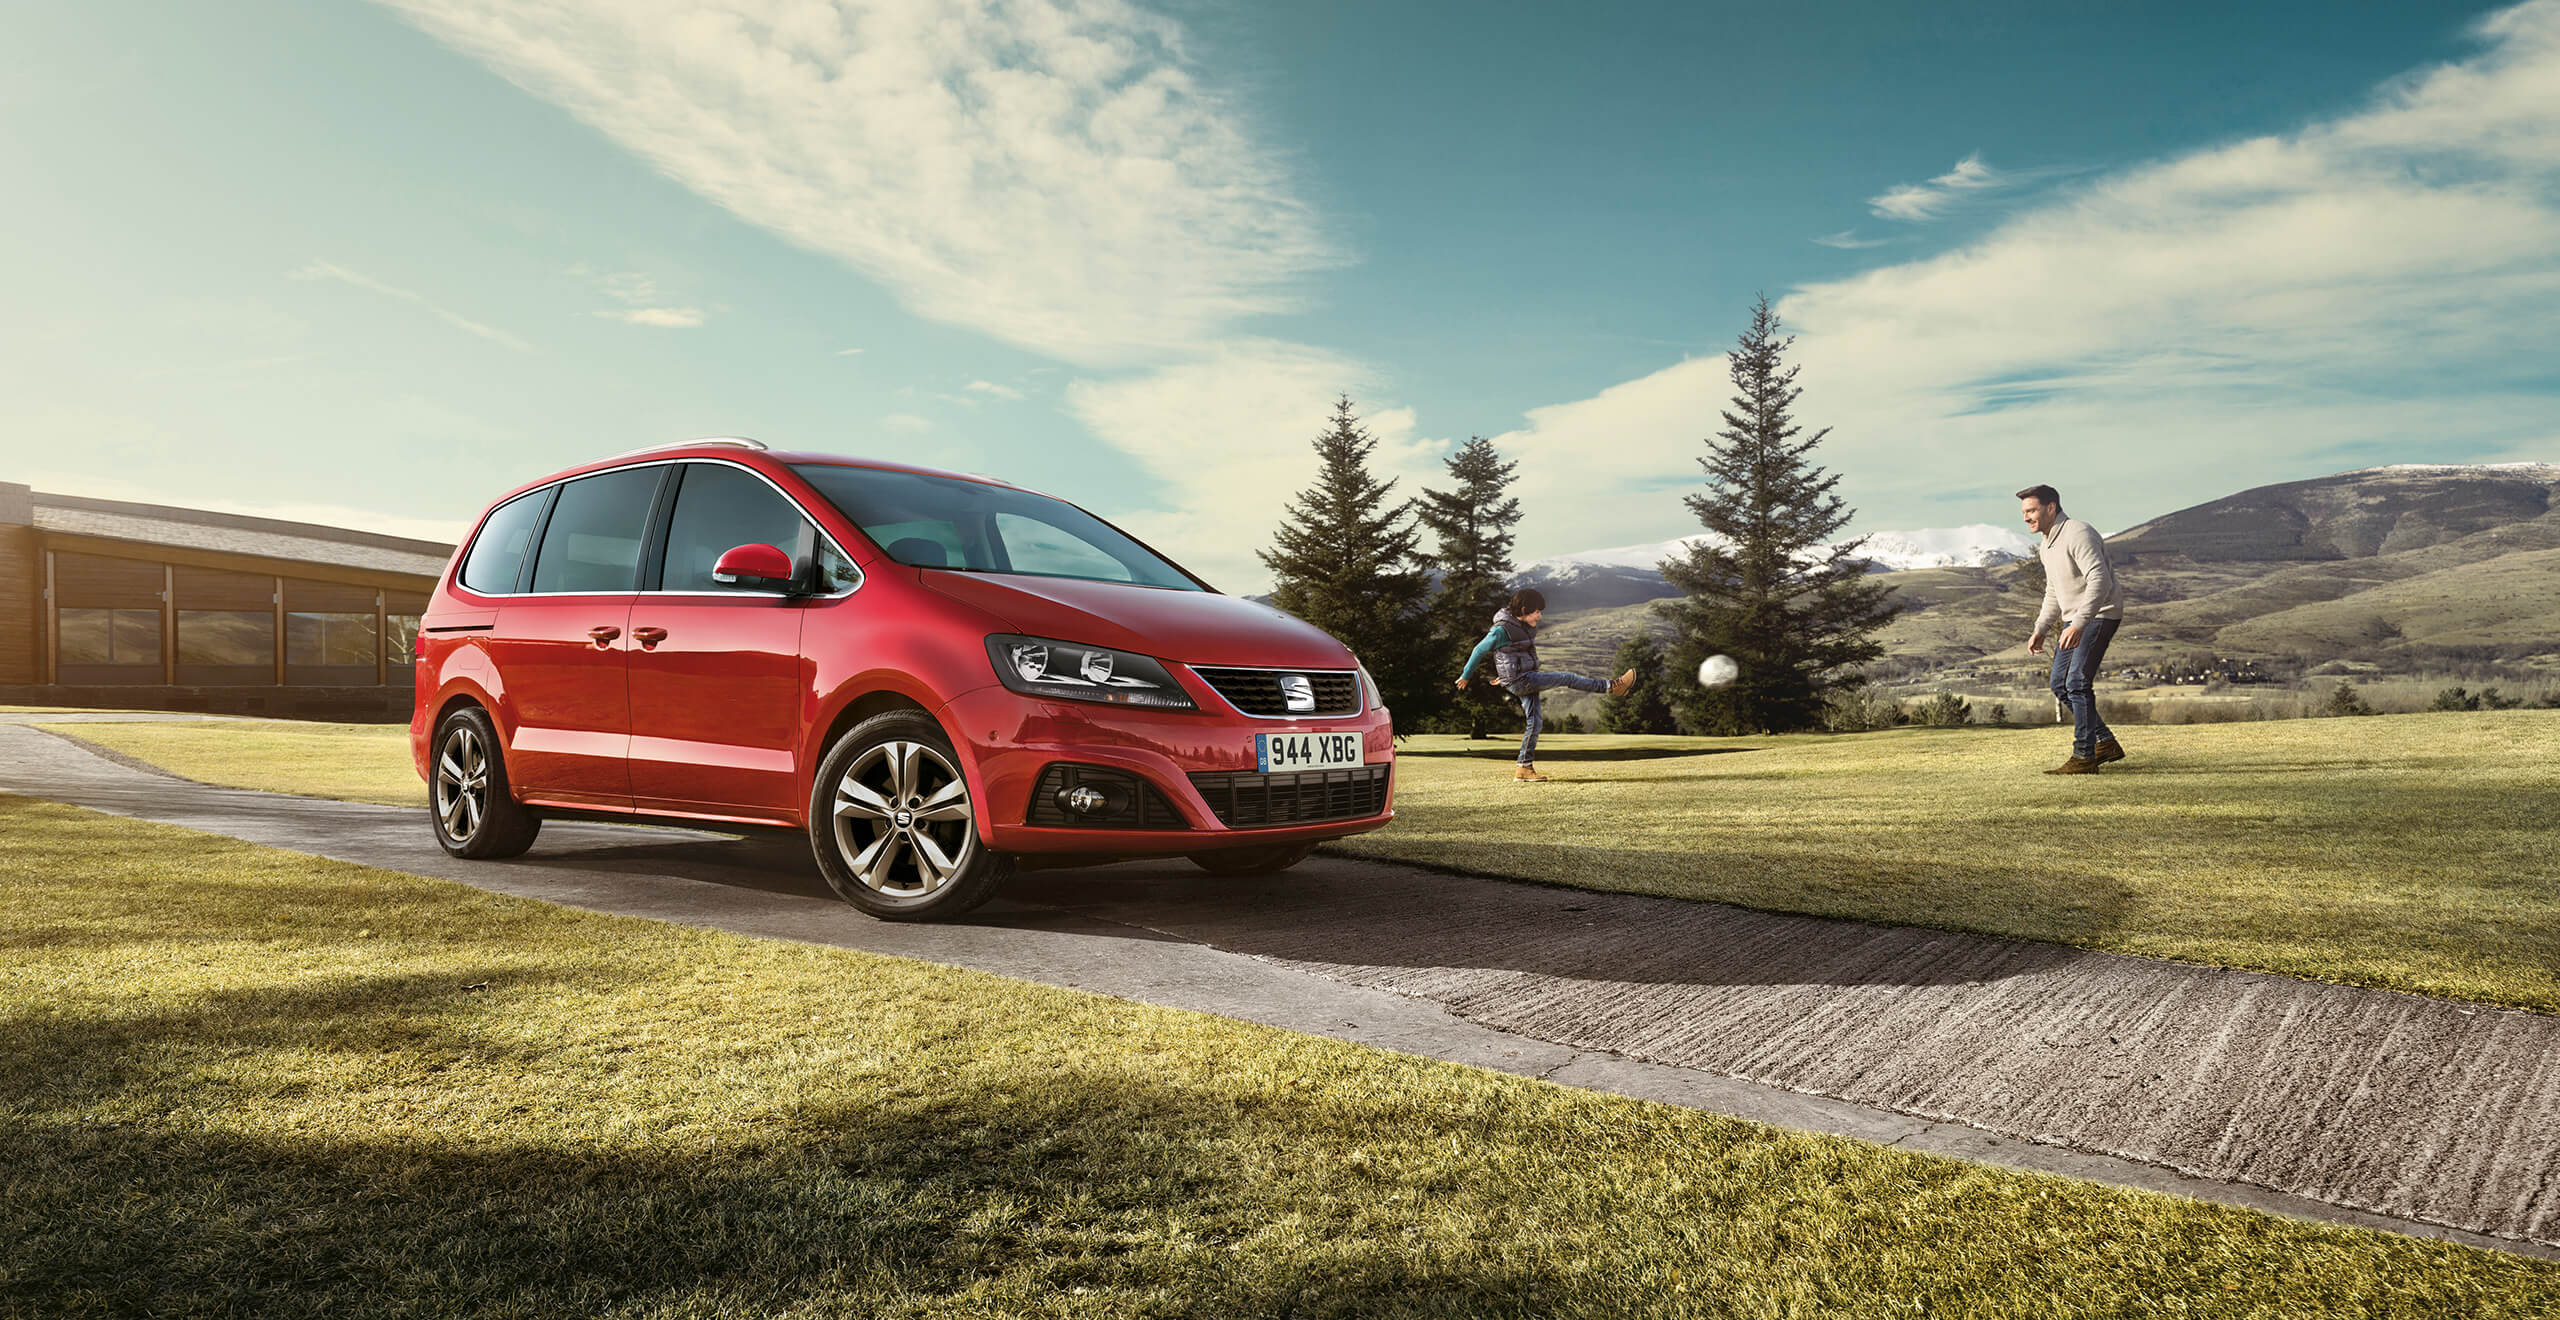 SEAT Alhambra packed full technology features